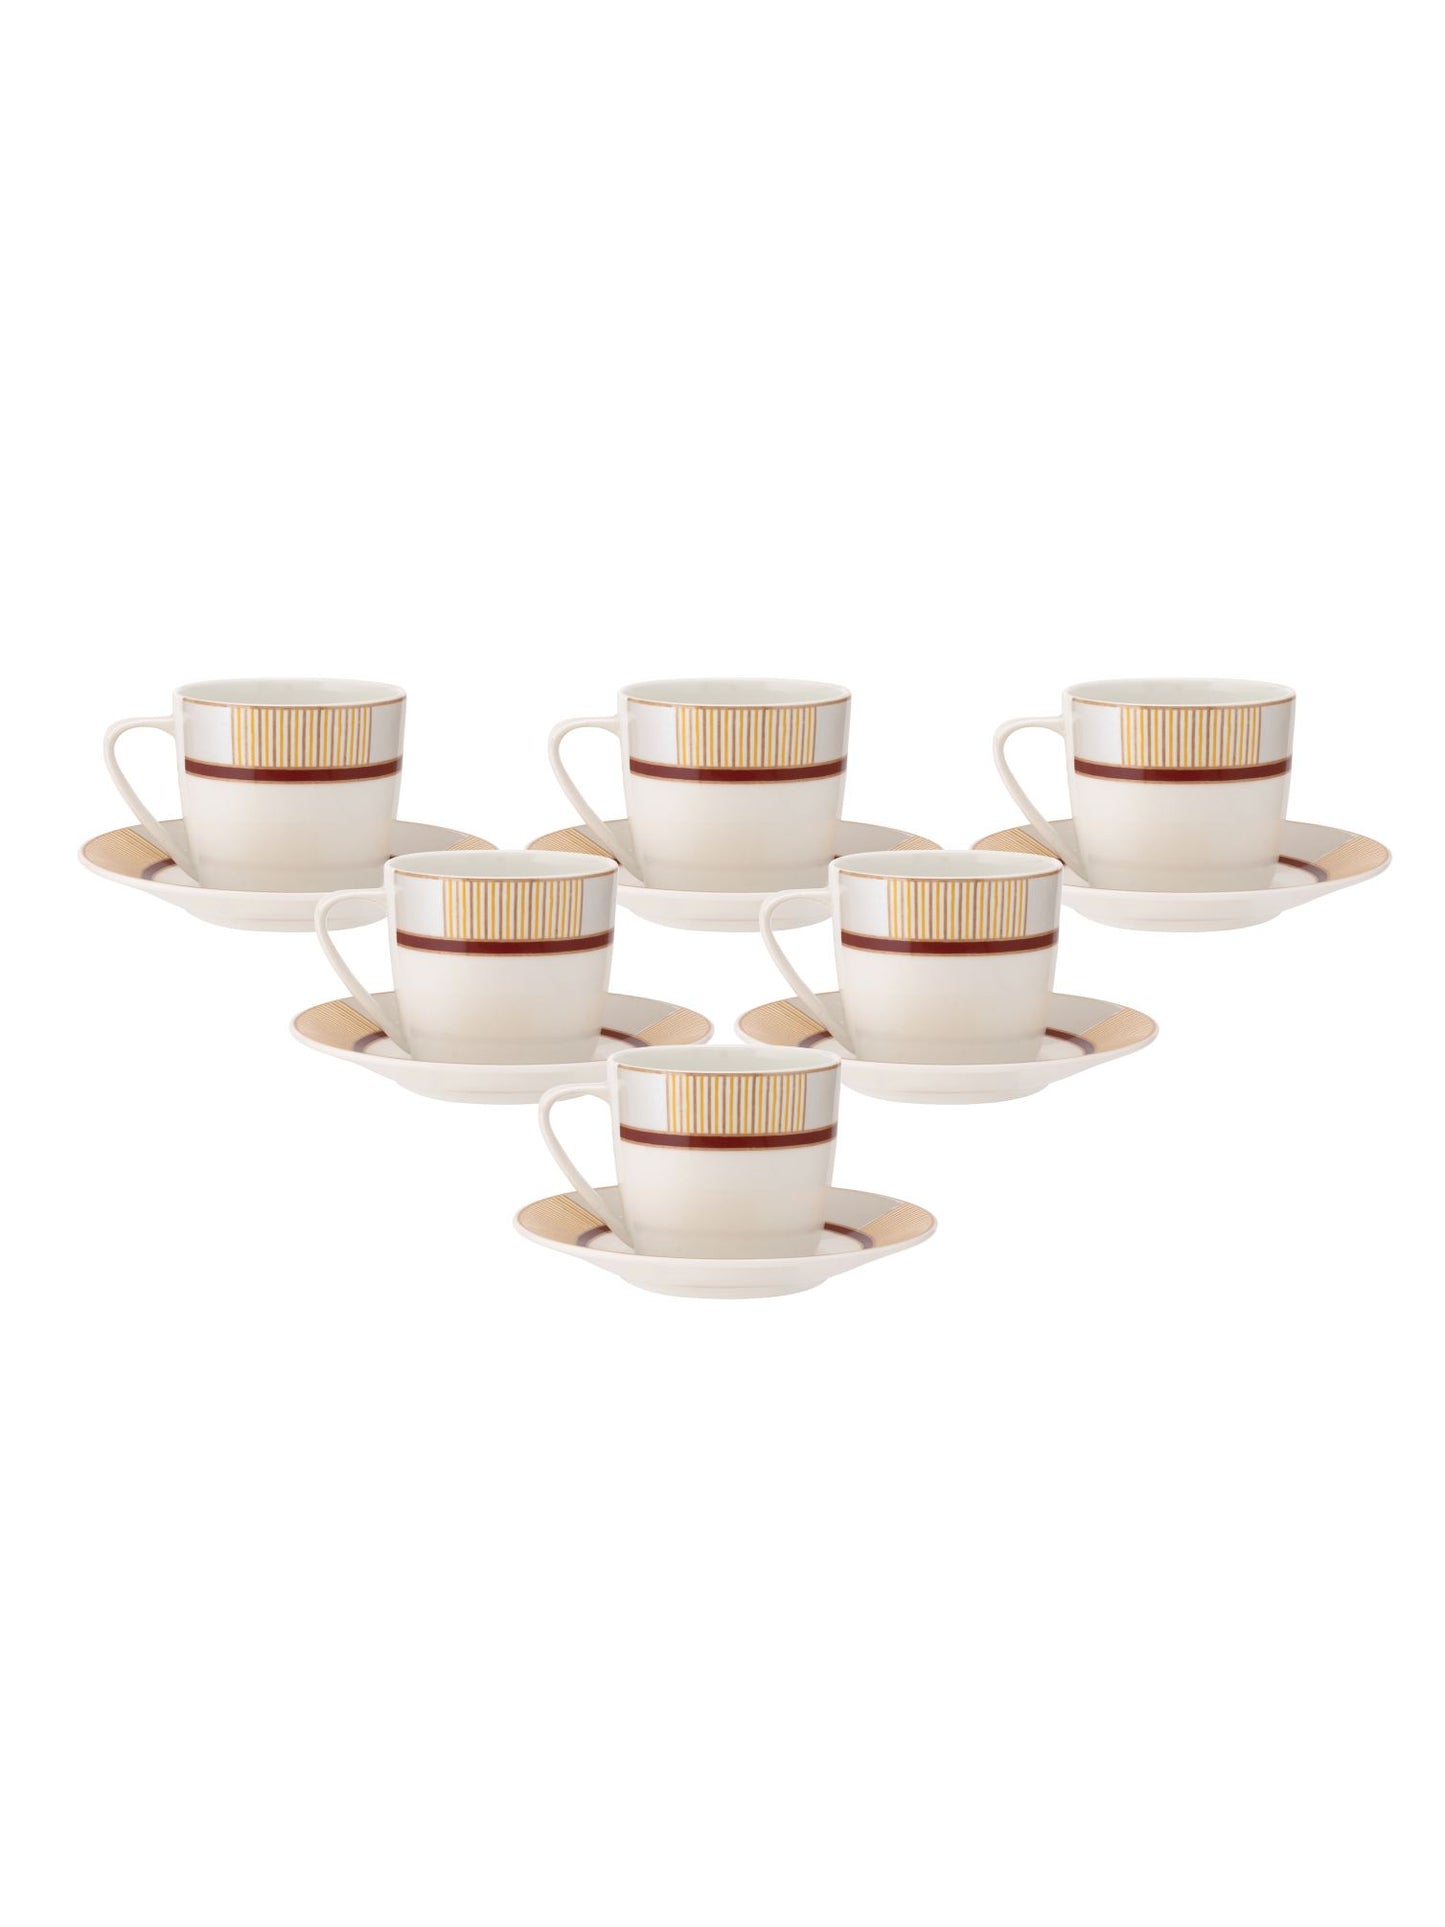 Cheers Super Cup & Saucer, 170 ml, Set of 12 (6 Cups + 6 Saucers) (S383)